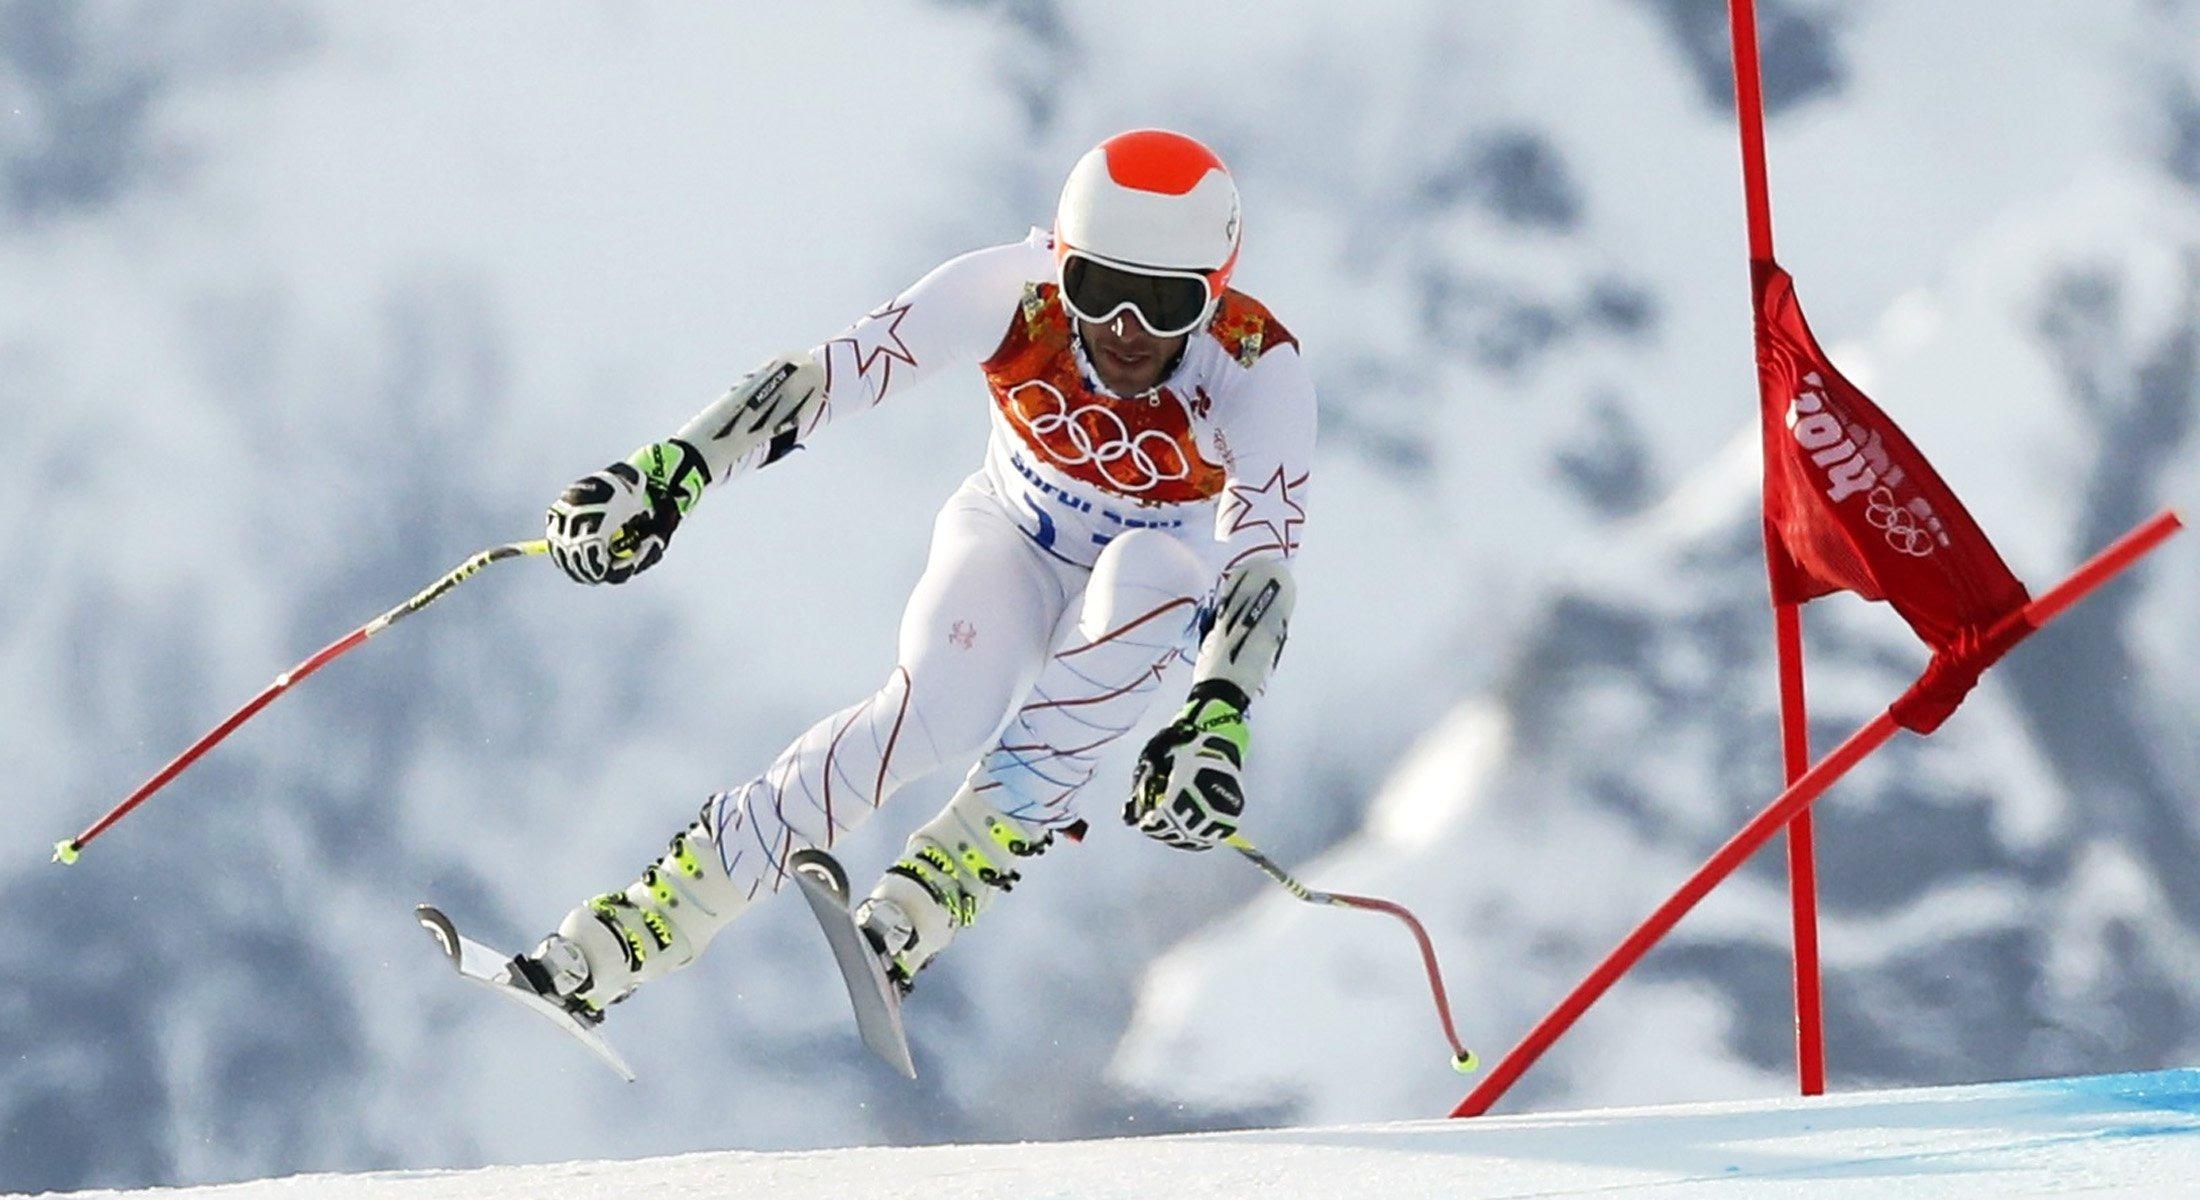 Alpine Skiing: Sochi 2014 Olympic Winter Games, Bode Miller, Downhill between obstacles. 2200x1200 HD Wallpaper.